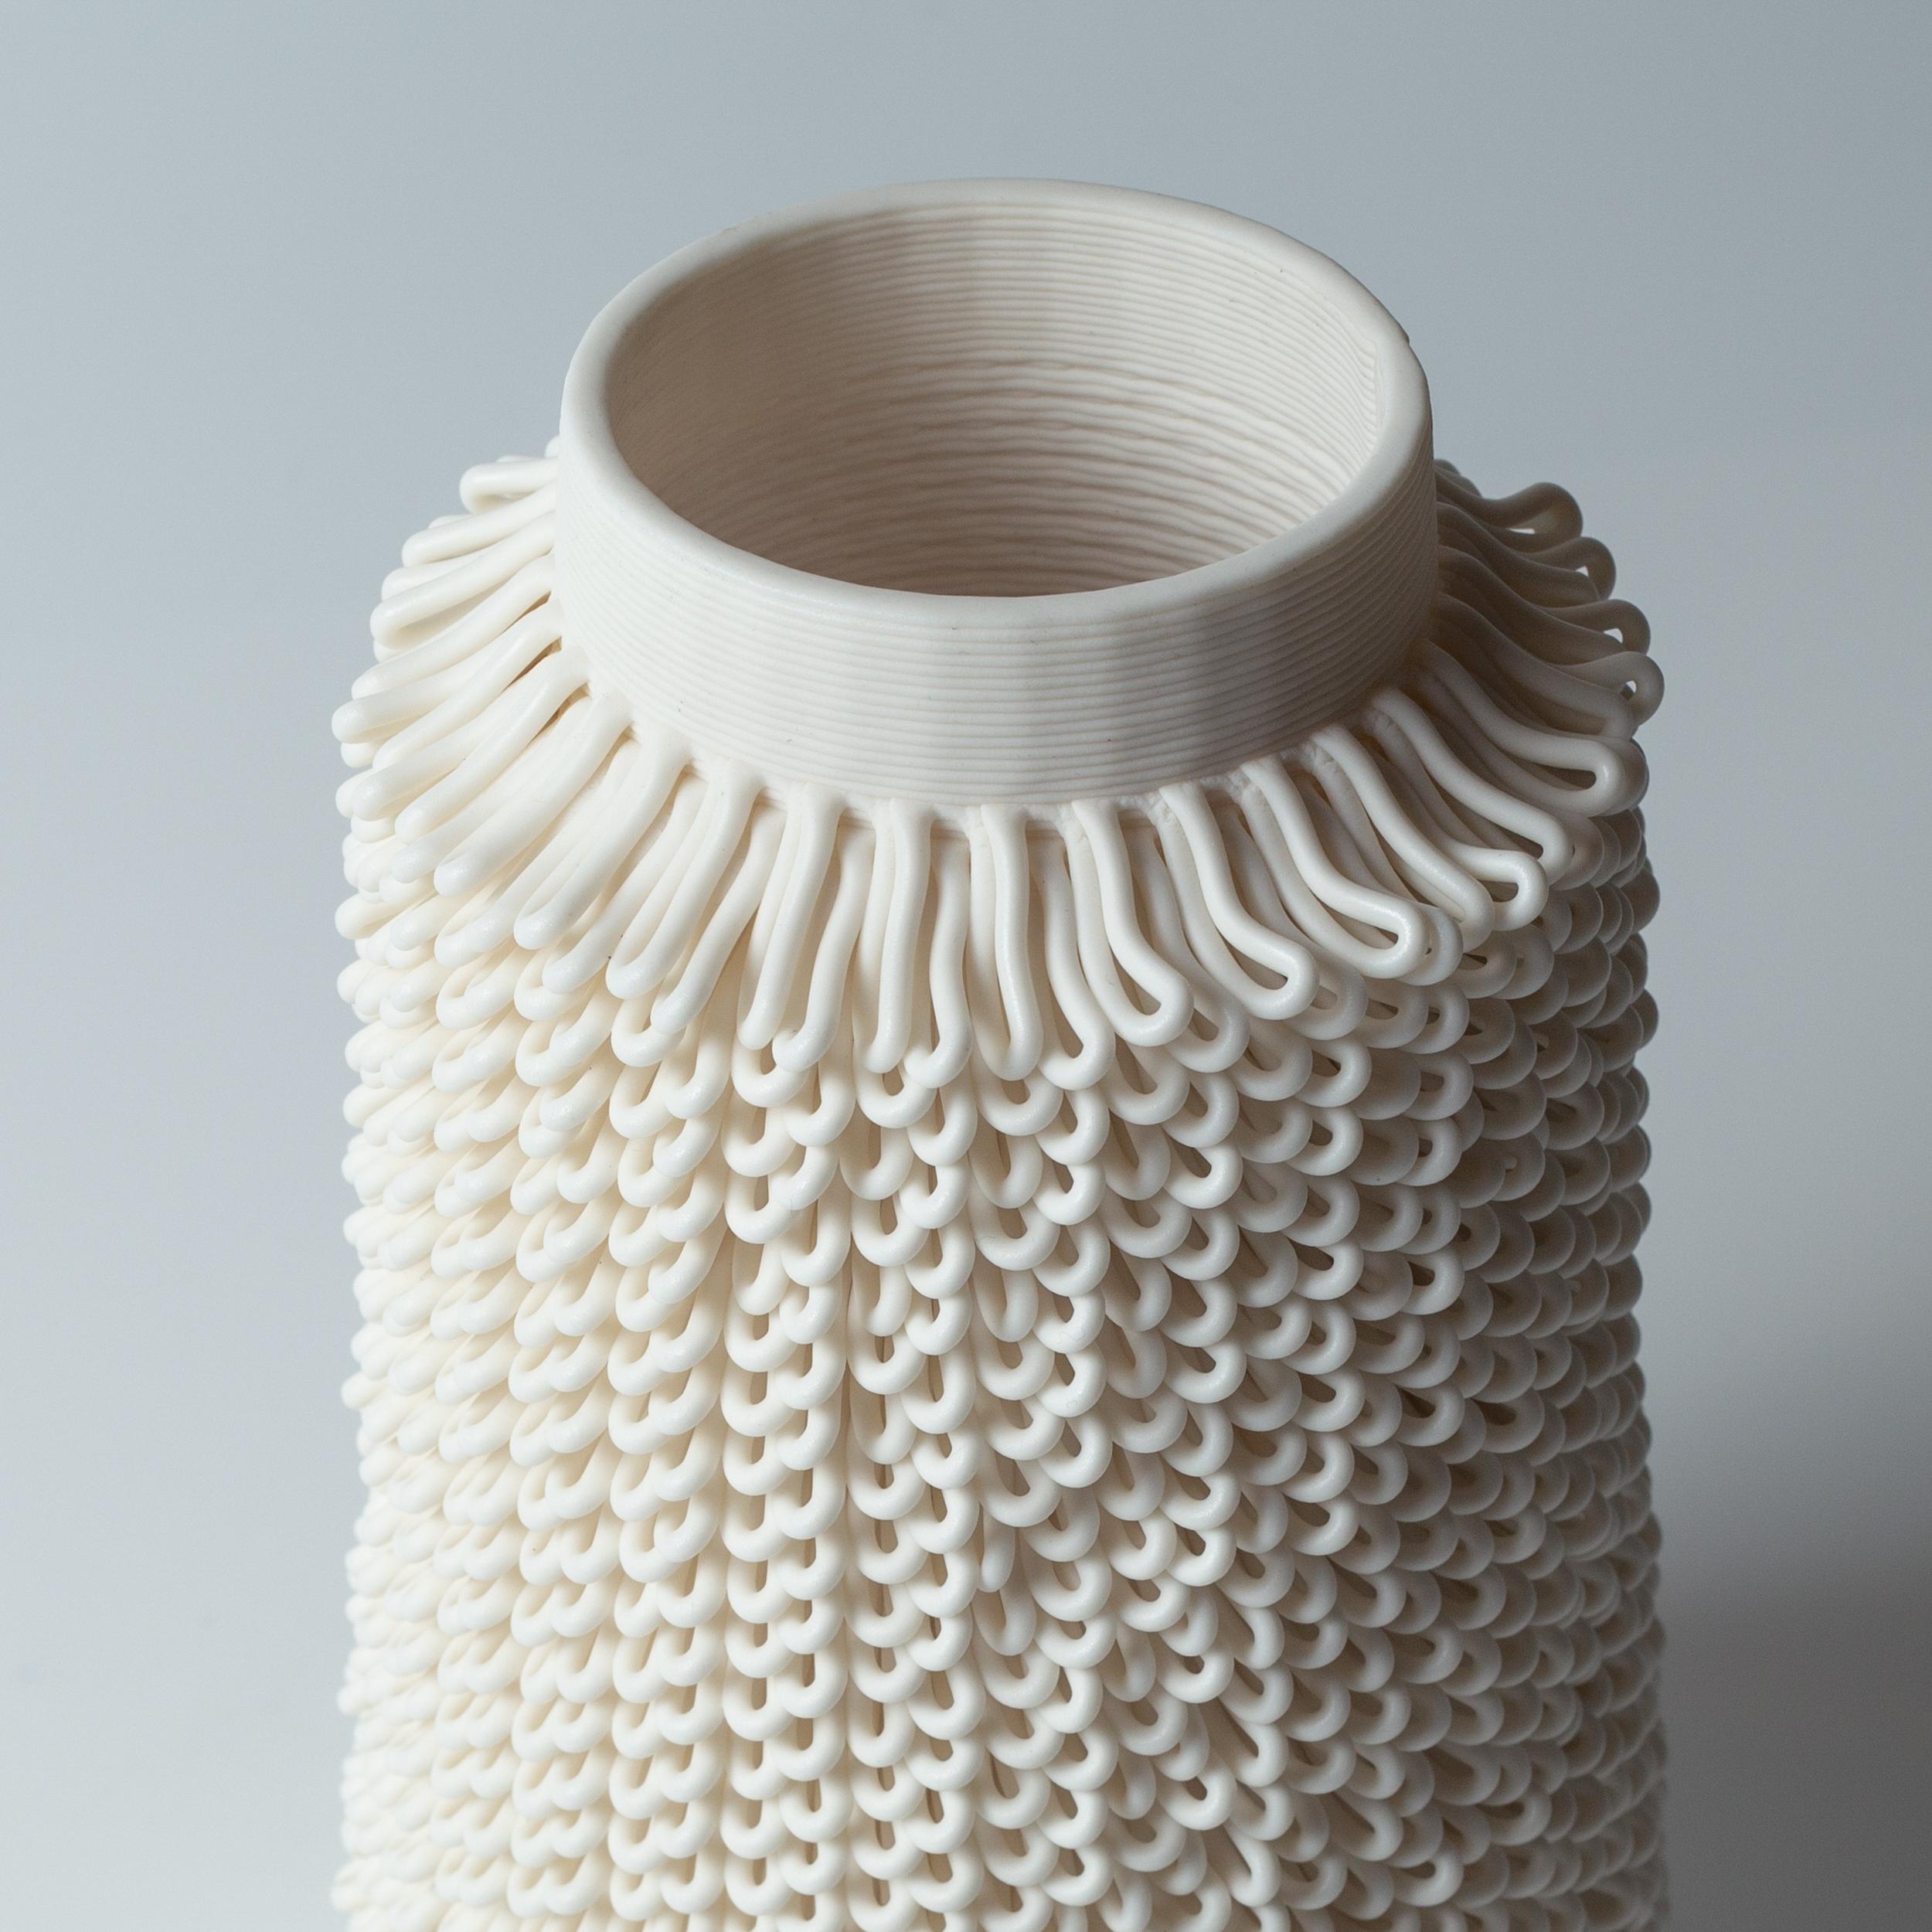 Contemporary D-0111 Dash Collection, 3D Printed Ceramics by Yiannis Vogdanis, BinaryCeramics